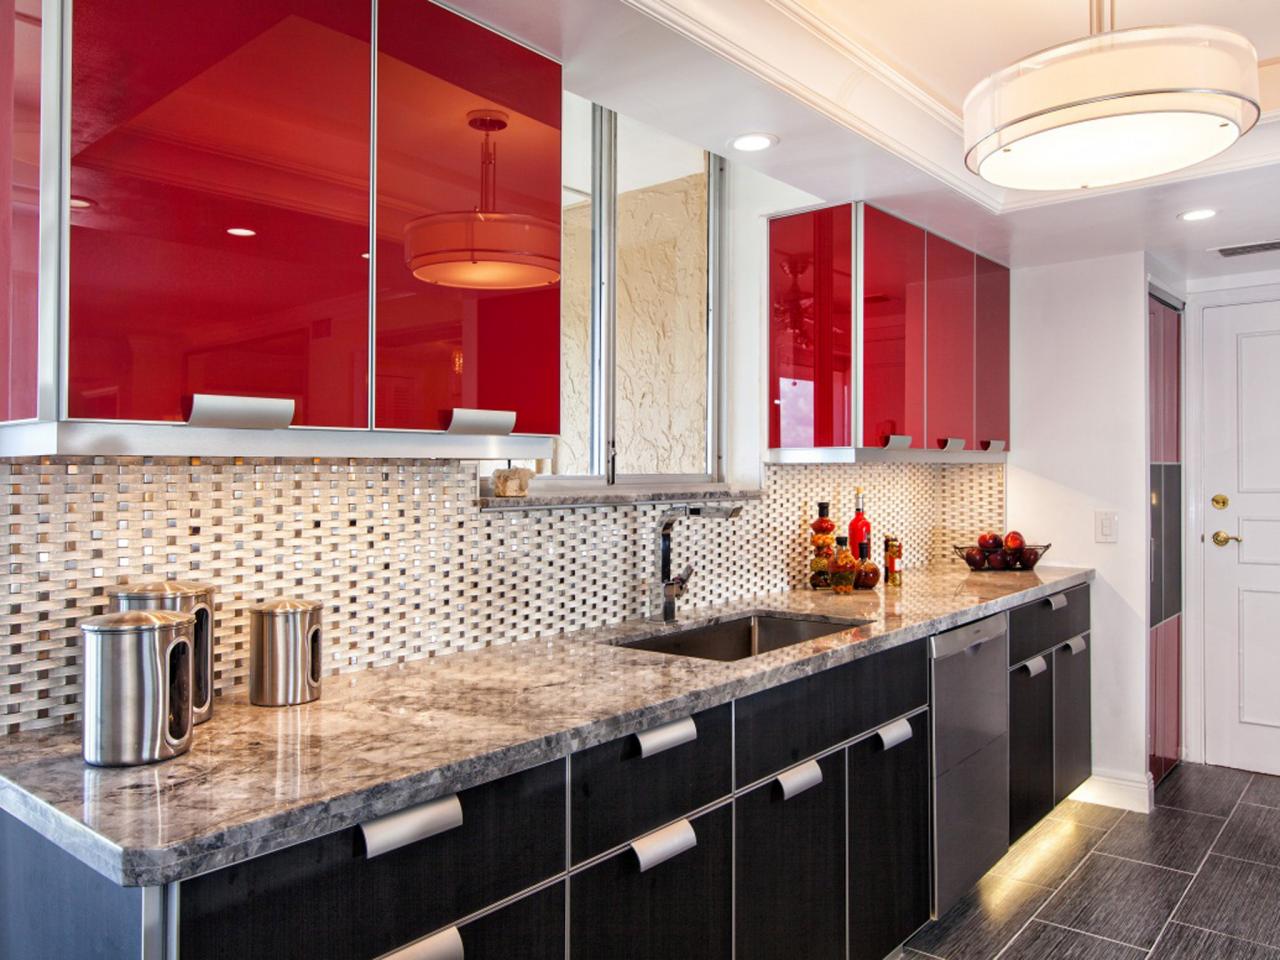 20 Totally Awesome Red Kitchen Designs - Decor Units